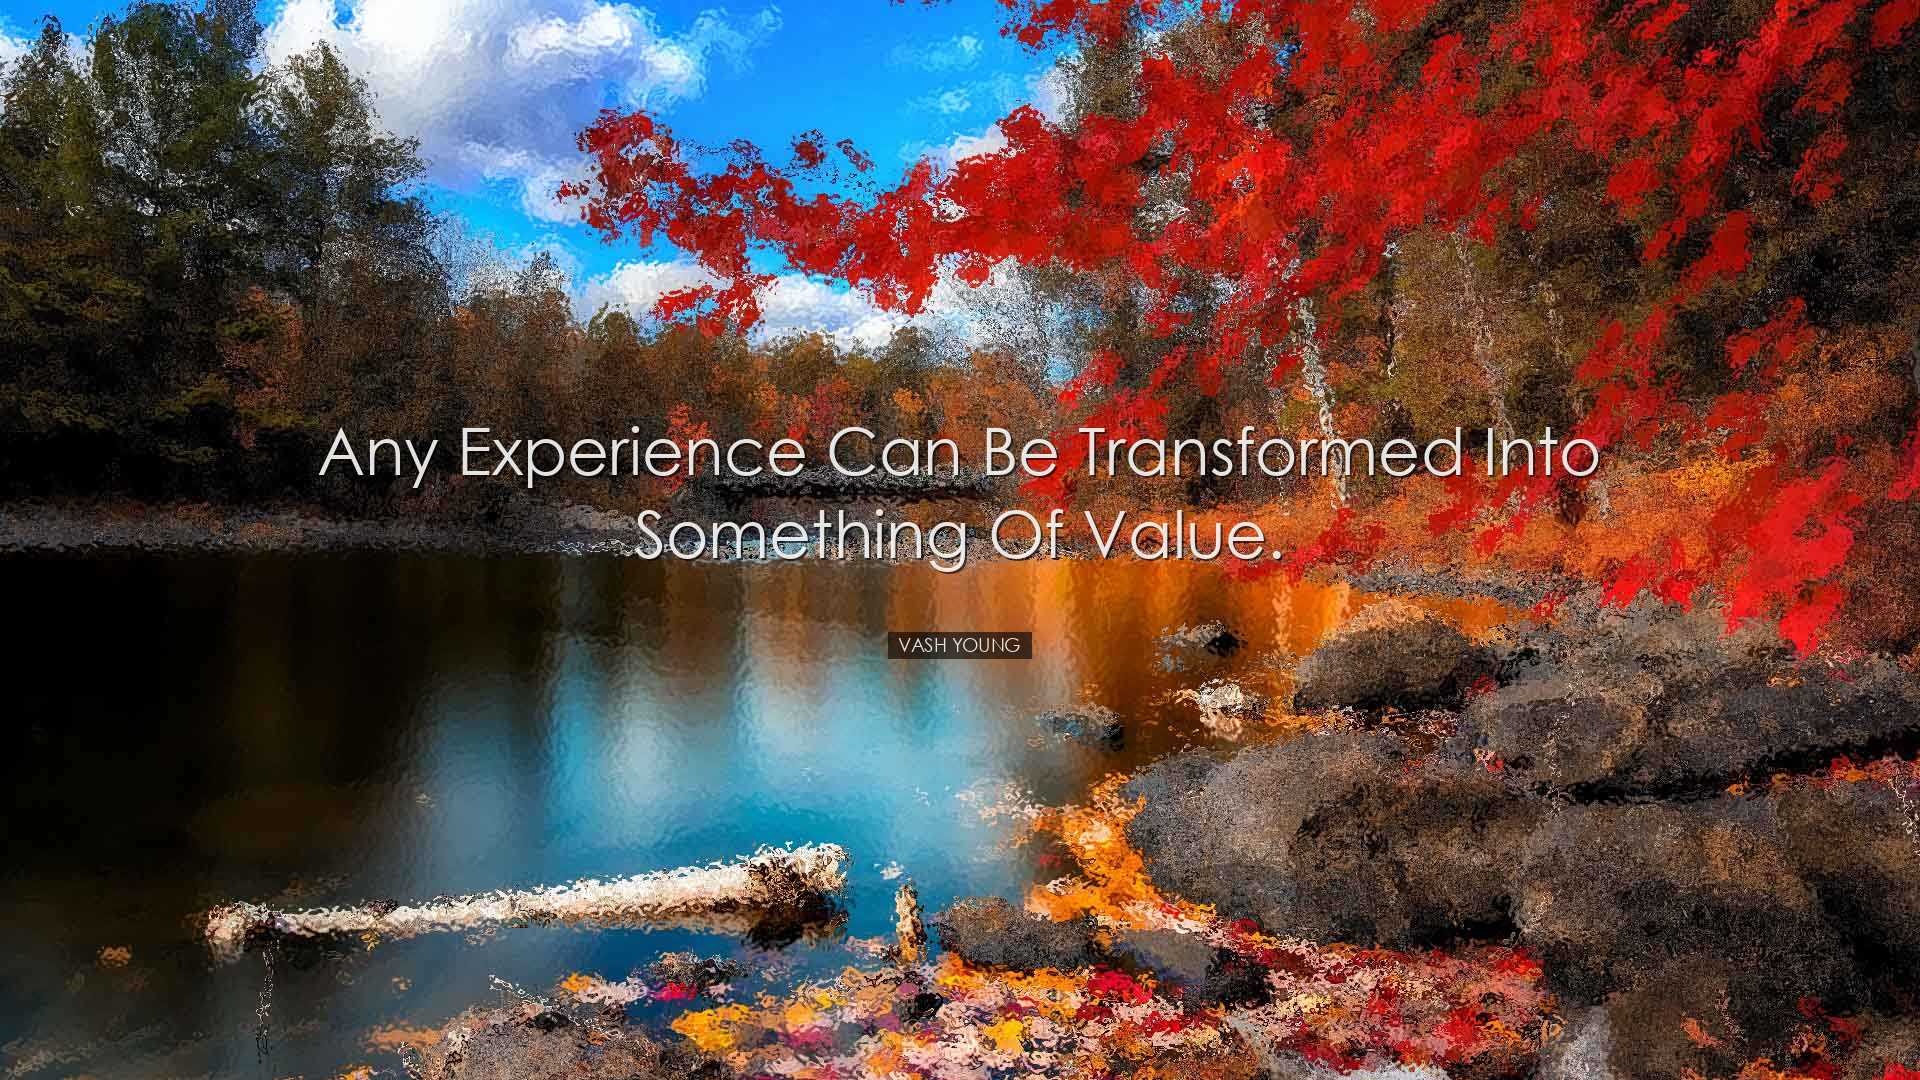 Any experience can be transformed into something of value. - Vash